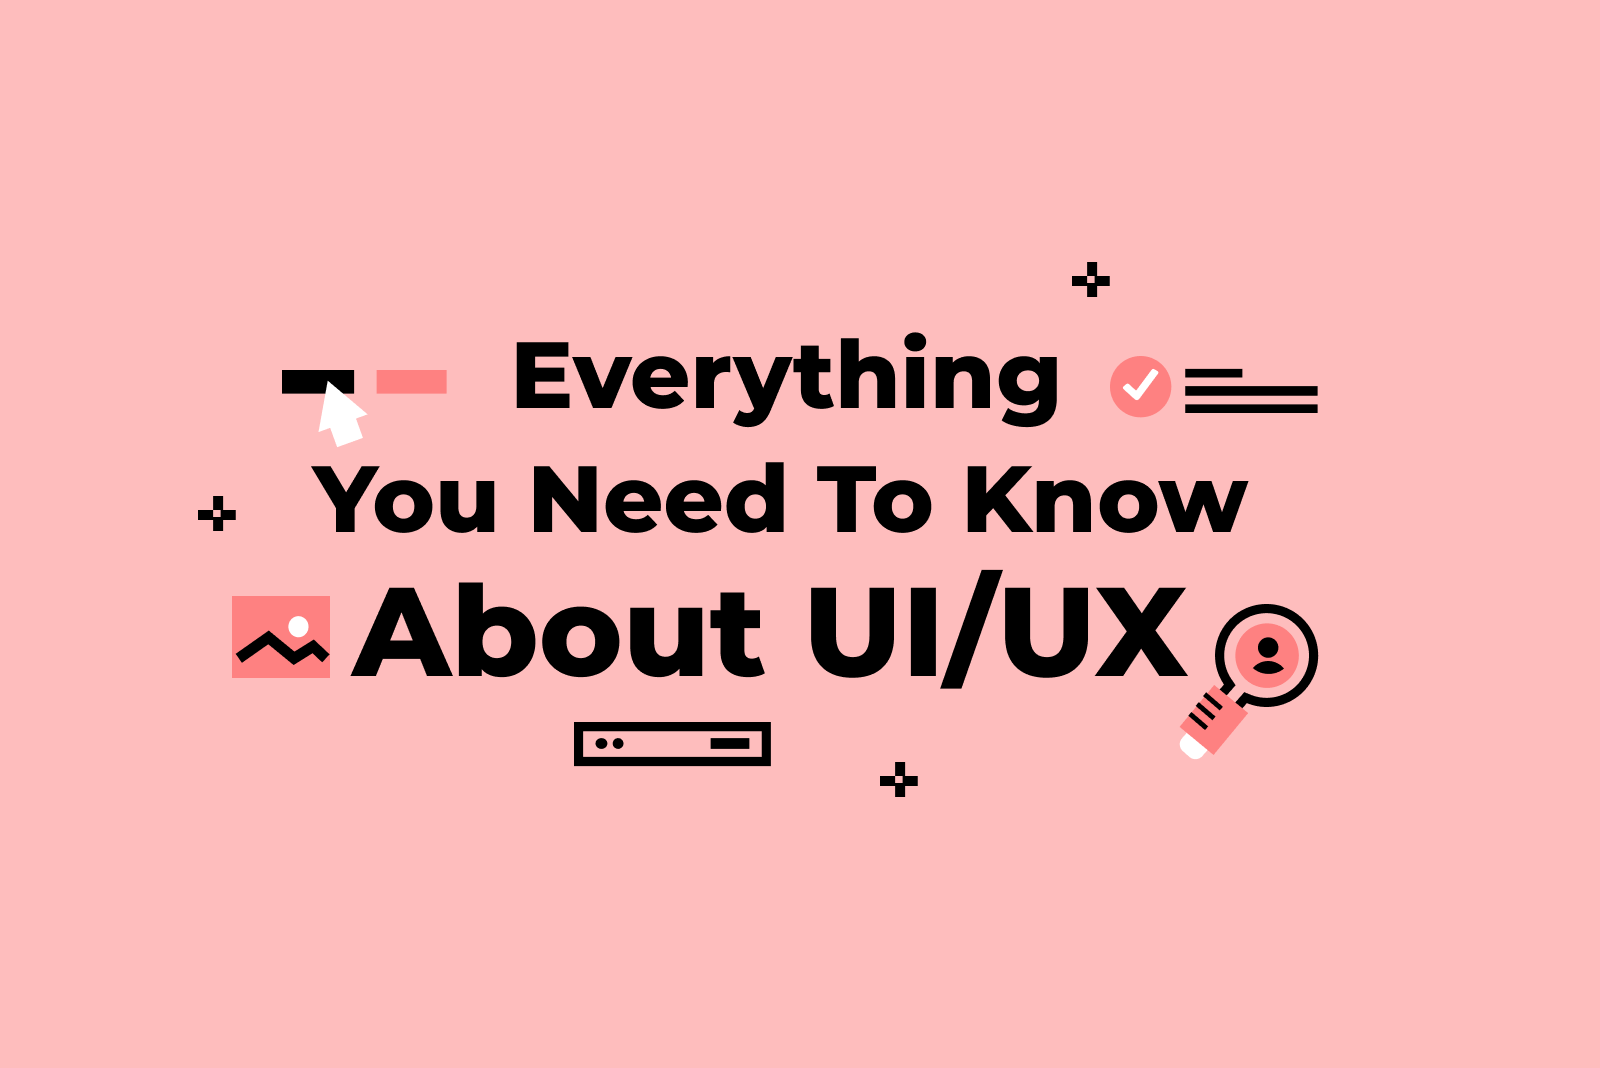 Pink graphic with title "Everything You Need To Know About UI/UX" with floating icons around title